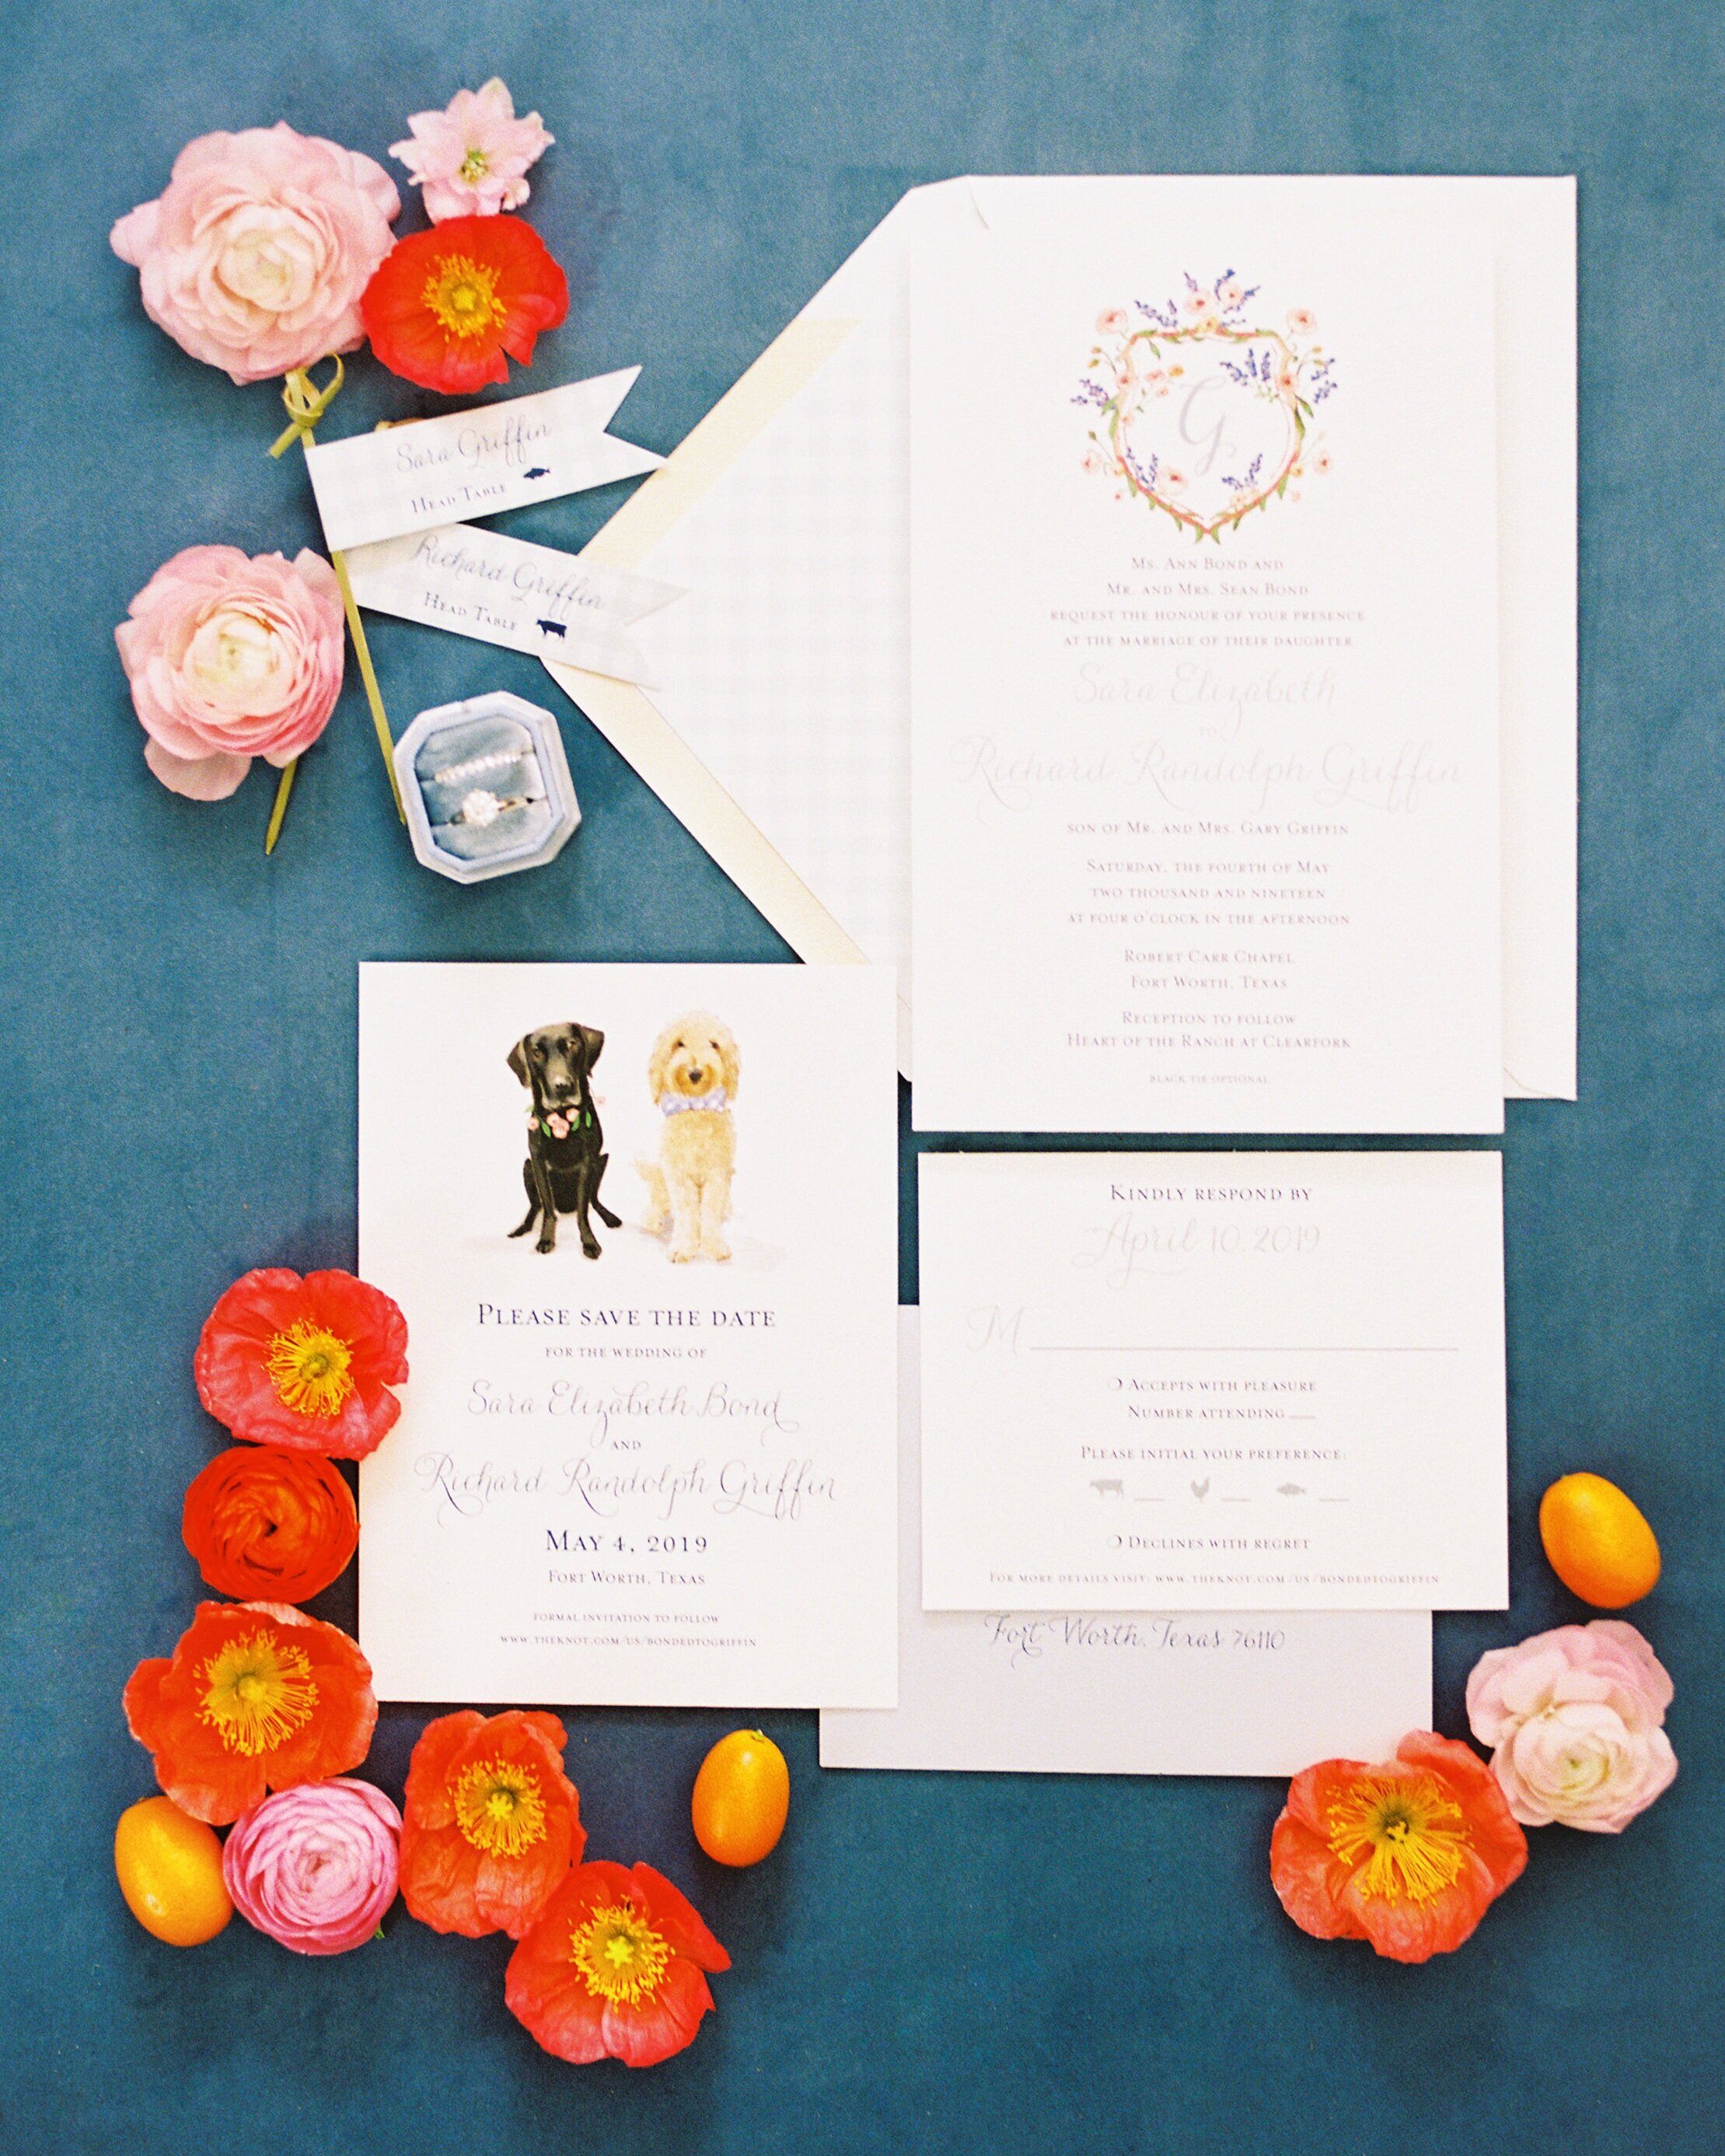  Dallas Fort Worth Texas Destination Luxury Creative Wedding Event Planner Planning Design Invitation Flatlay with a Custom Crest and colorful Flowers 